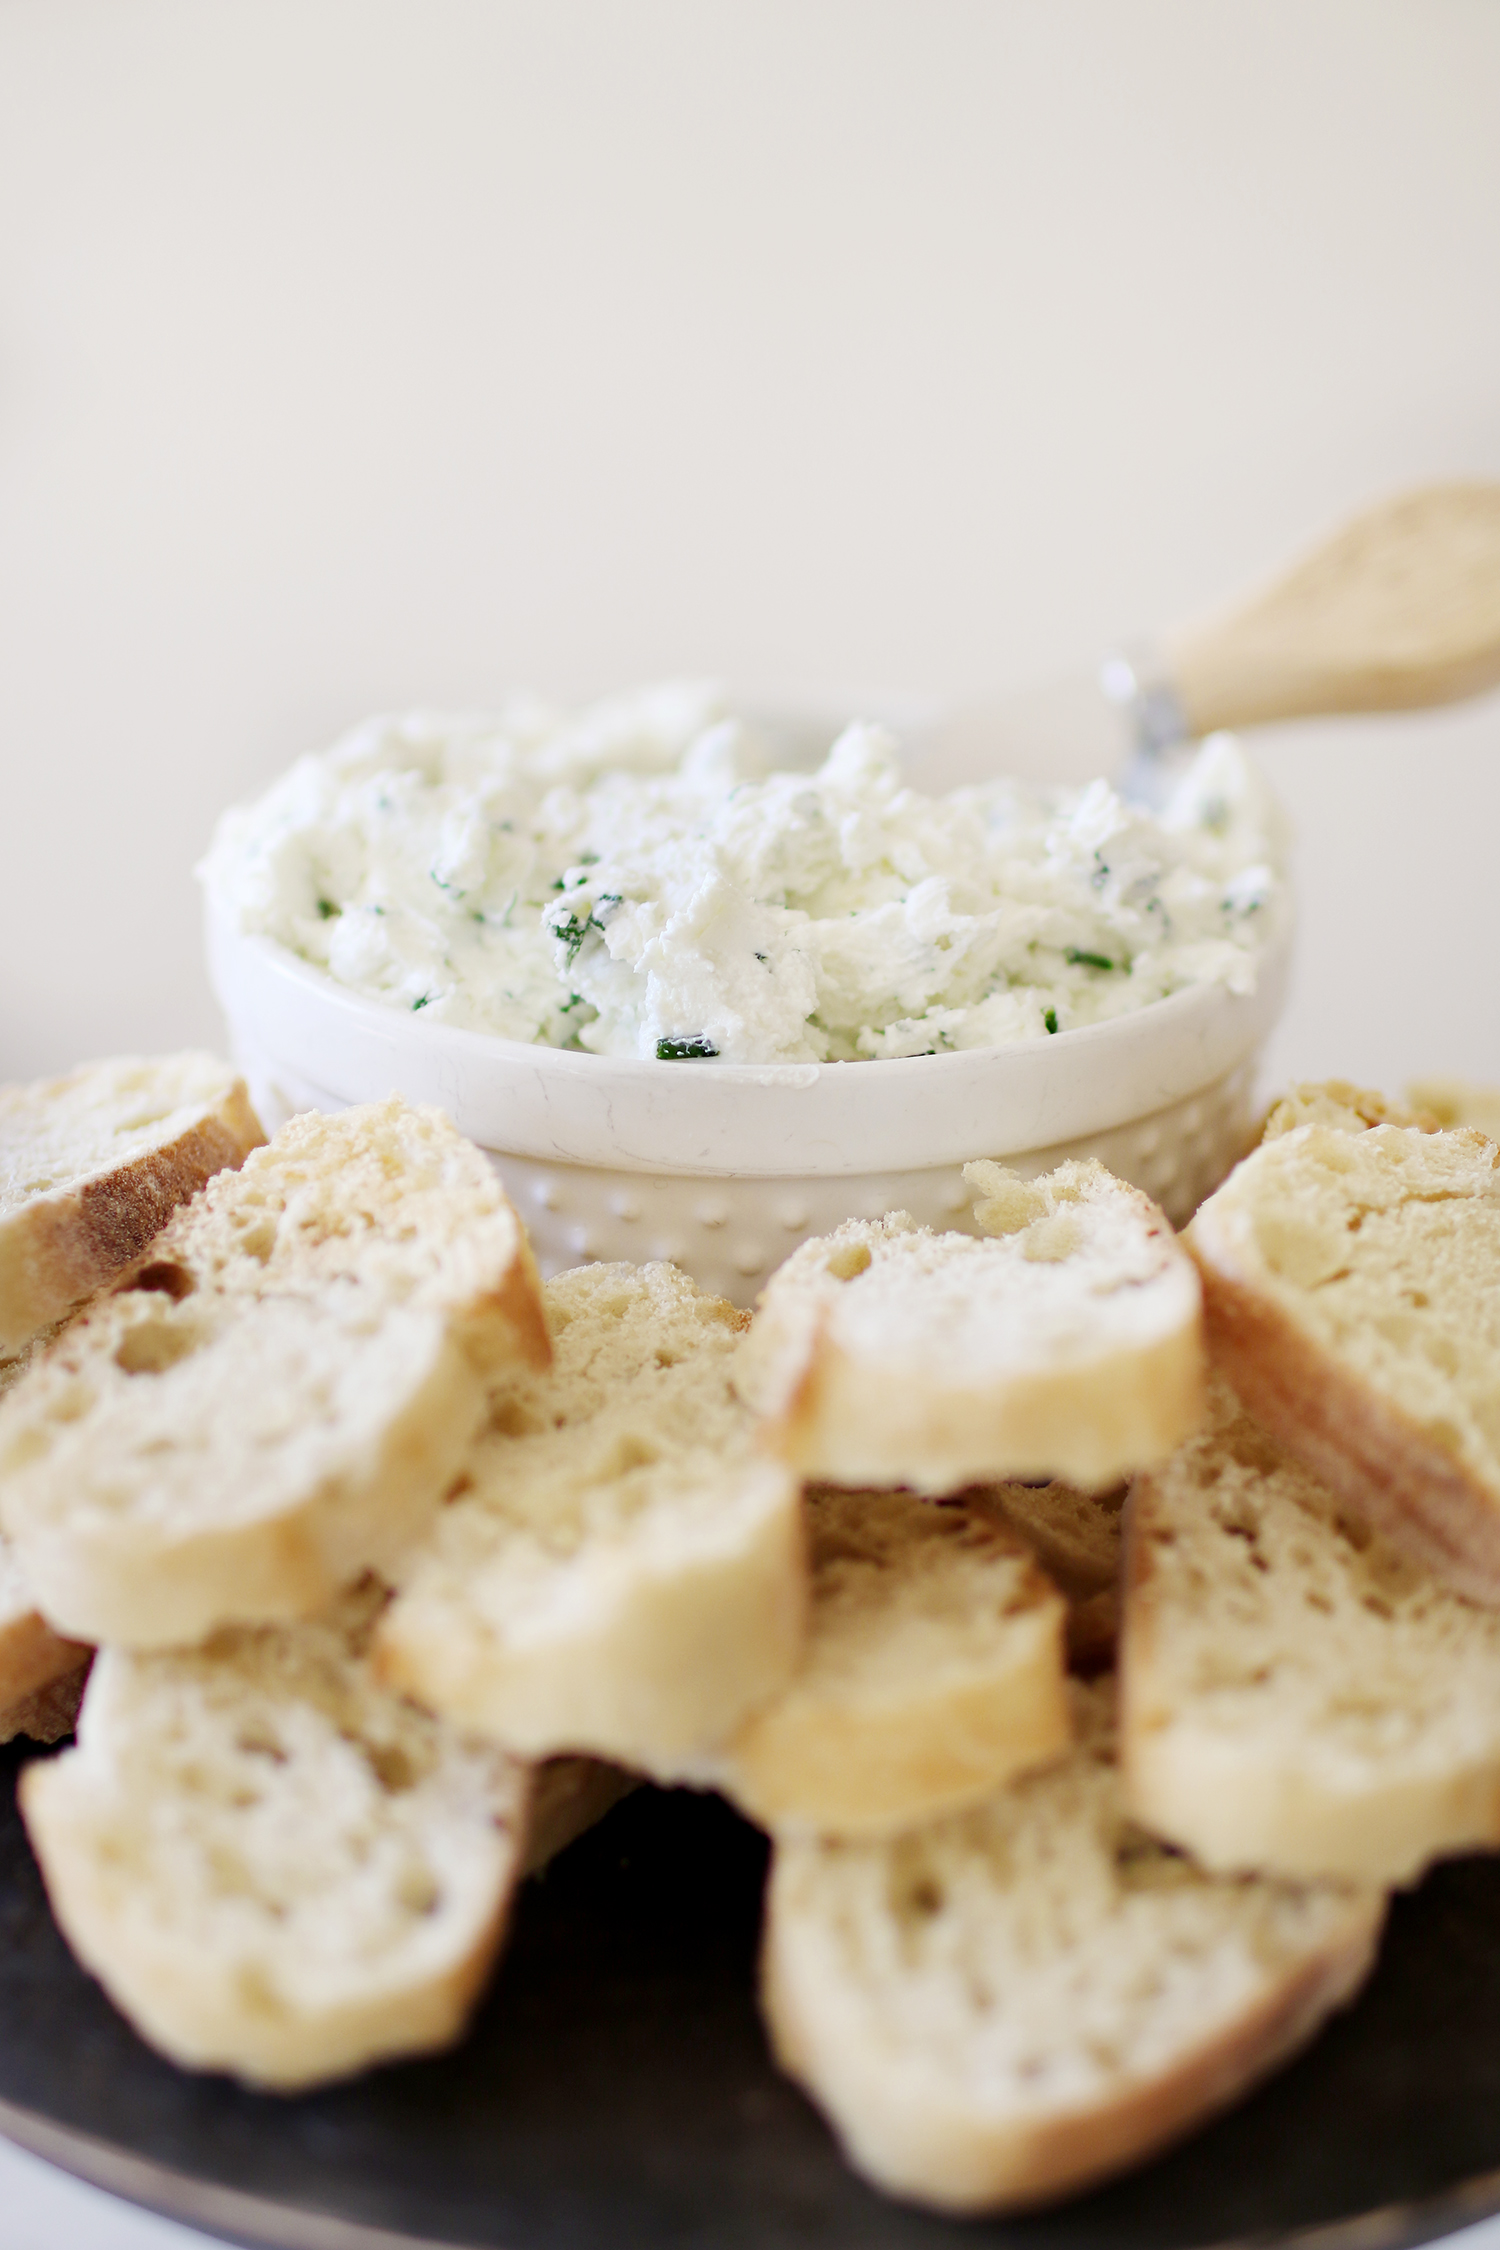 An easy appetizer: Goat Cheese and Herb Spread. The perfect touch to entertaining guests this holiday season and one that will be a crowd pleaser! Catch the entire recipe and how-to over at Haus of Layne #EasyAppetizers #AppetizerRecipe #HolidayRecipes #EasyHolidayRecipes #HolidayAppetizerRecipe